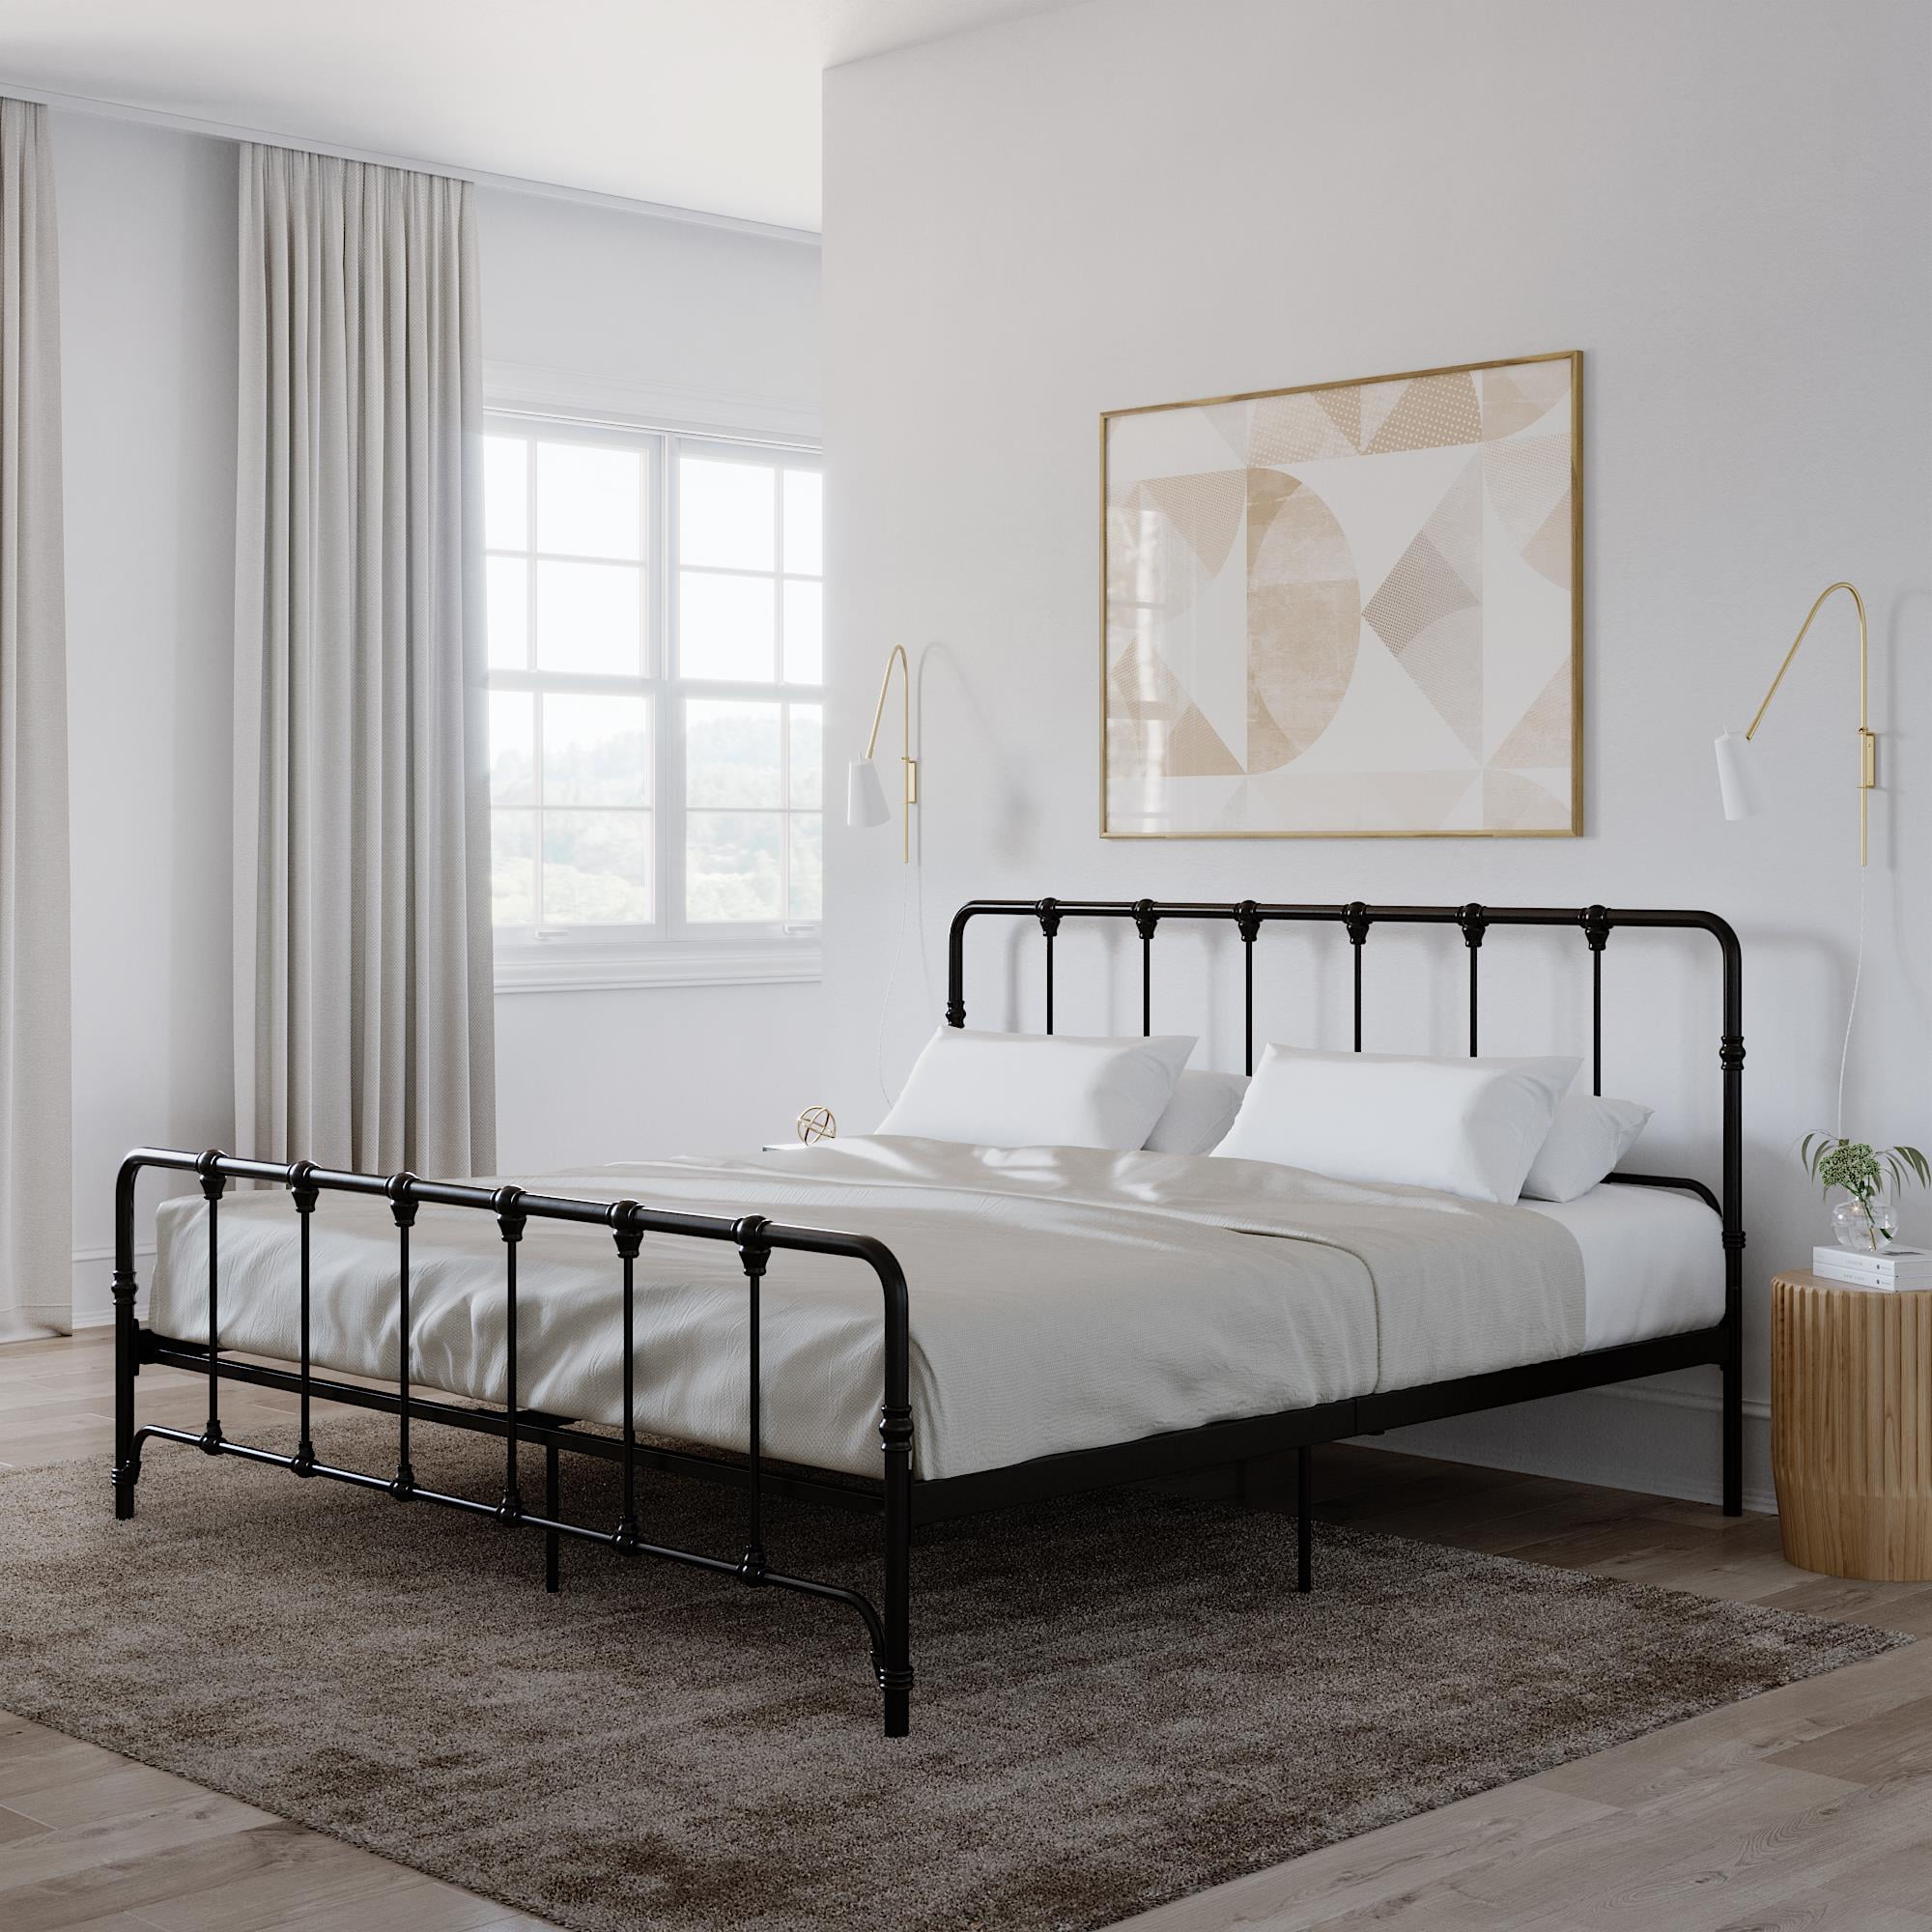 Mainstays Farmhouse Metal Bed King, How To Set Up A Full Size Metal Bed Frame